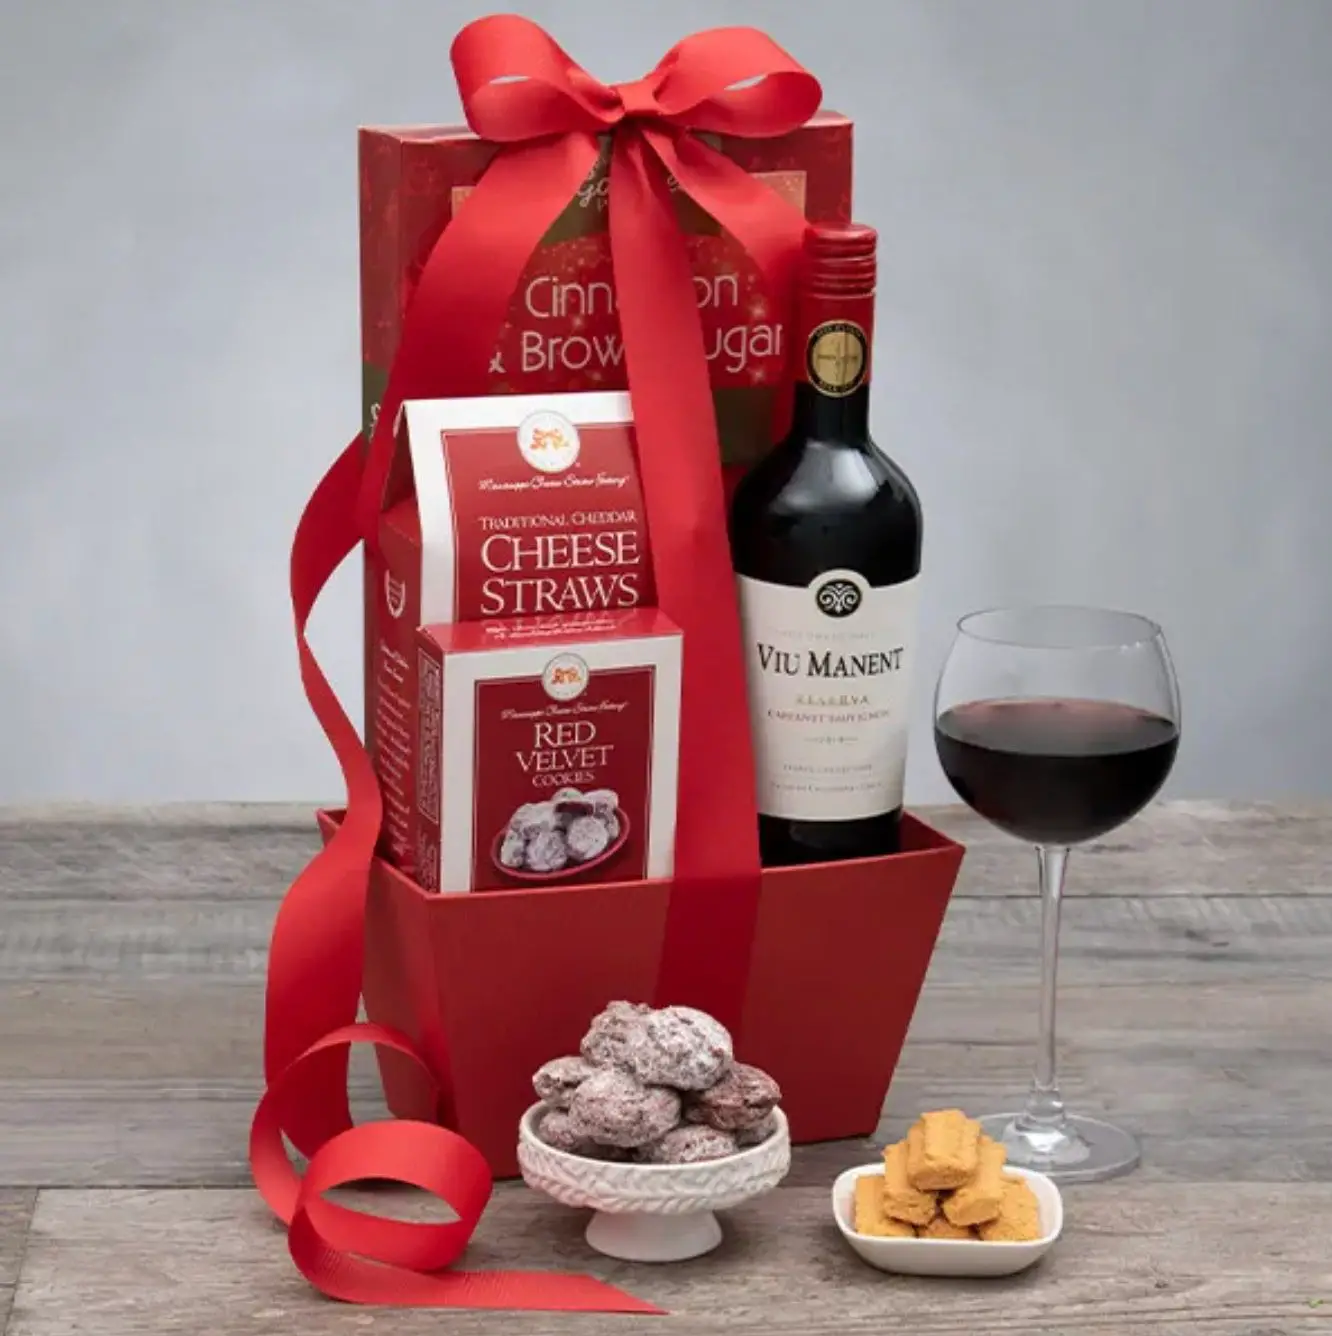 The 15 Best Wine Gift Baskets in 2021